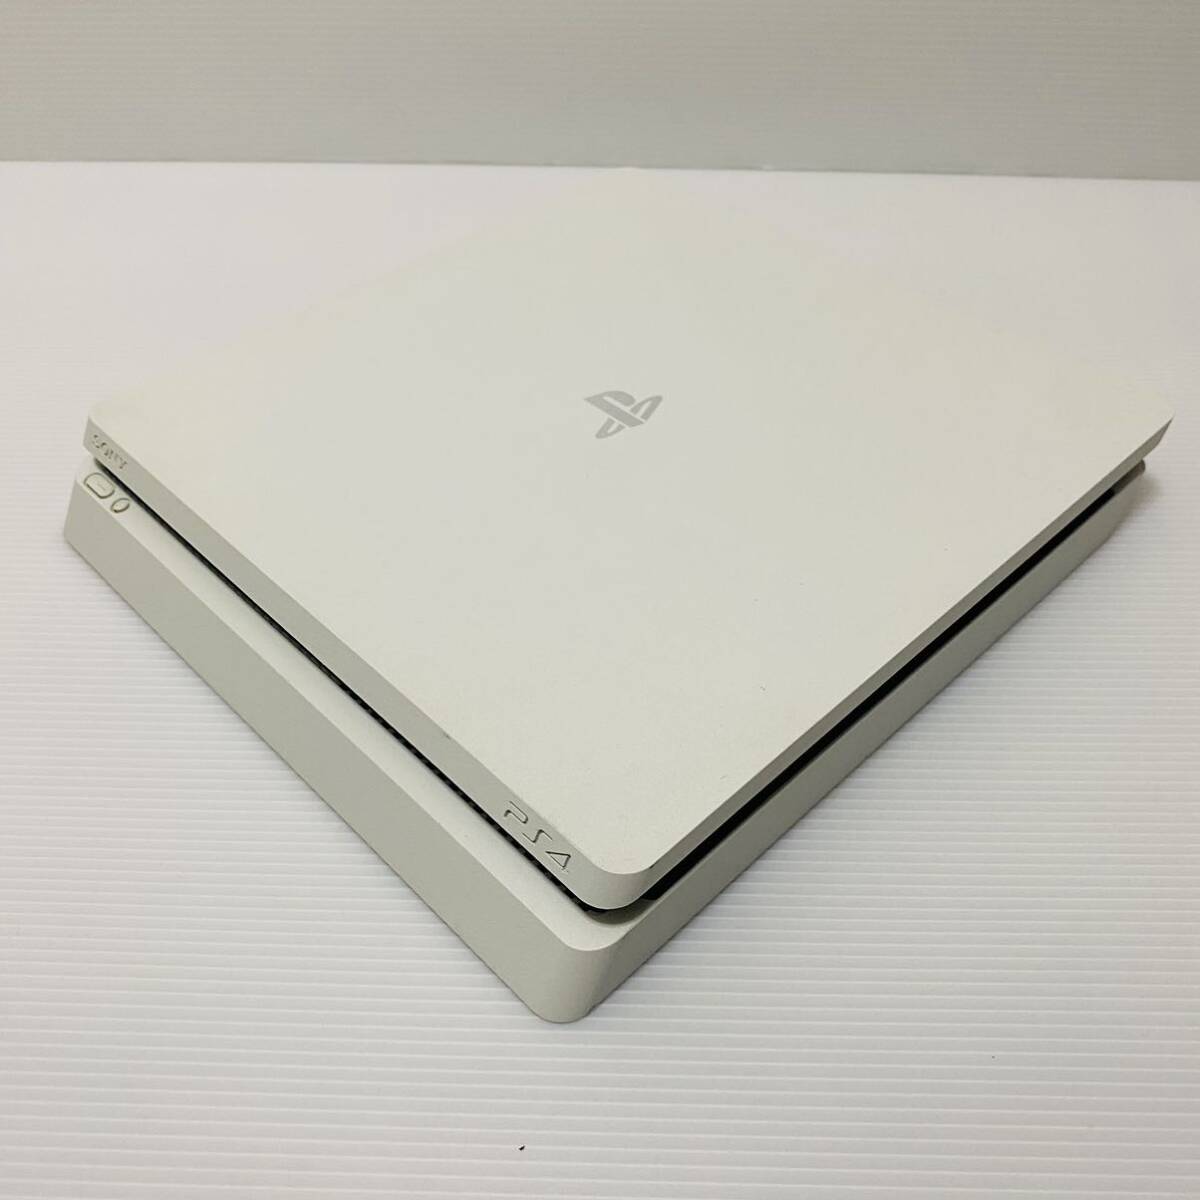 SONY Sony PS4 body PlayStation 4 PlayStation4 PlayStation 4 CUH-2100A operation goods white ⑩